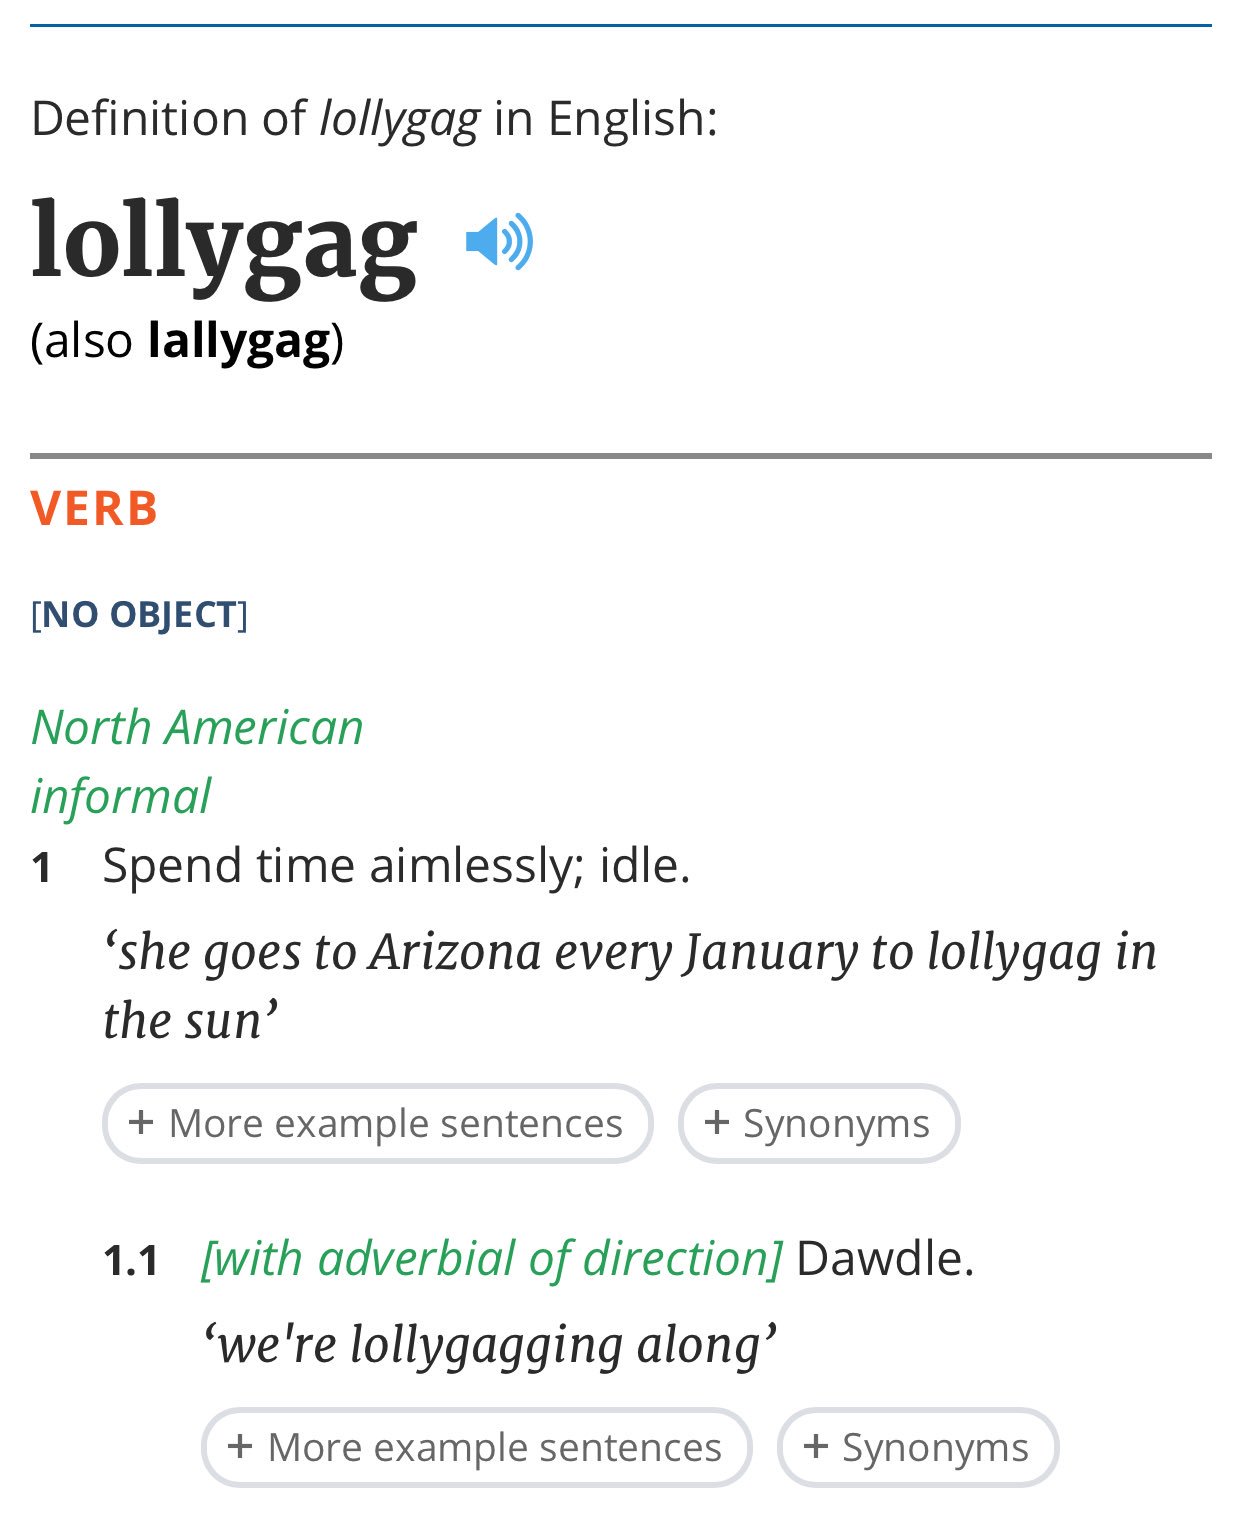 𝐋𝐞𝐜𝐭𝐮𝐫𝐞𝐫 𝐒𝐚𝐫𝐚𝐡 on X: Are you going to lollygag? What